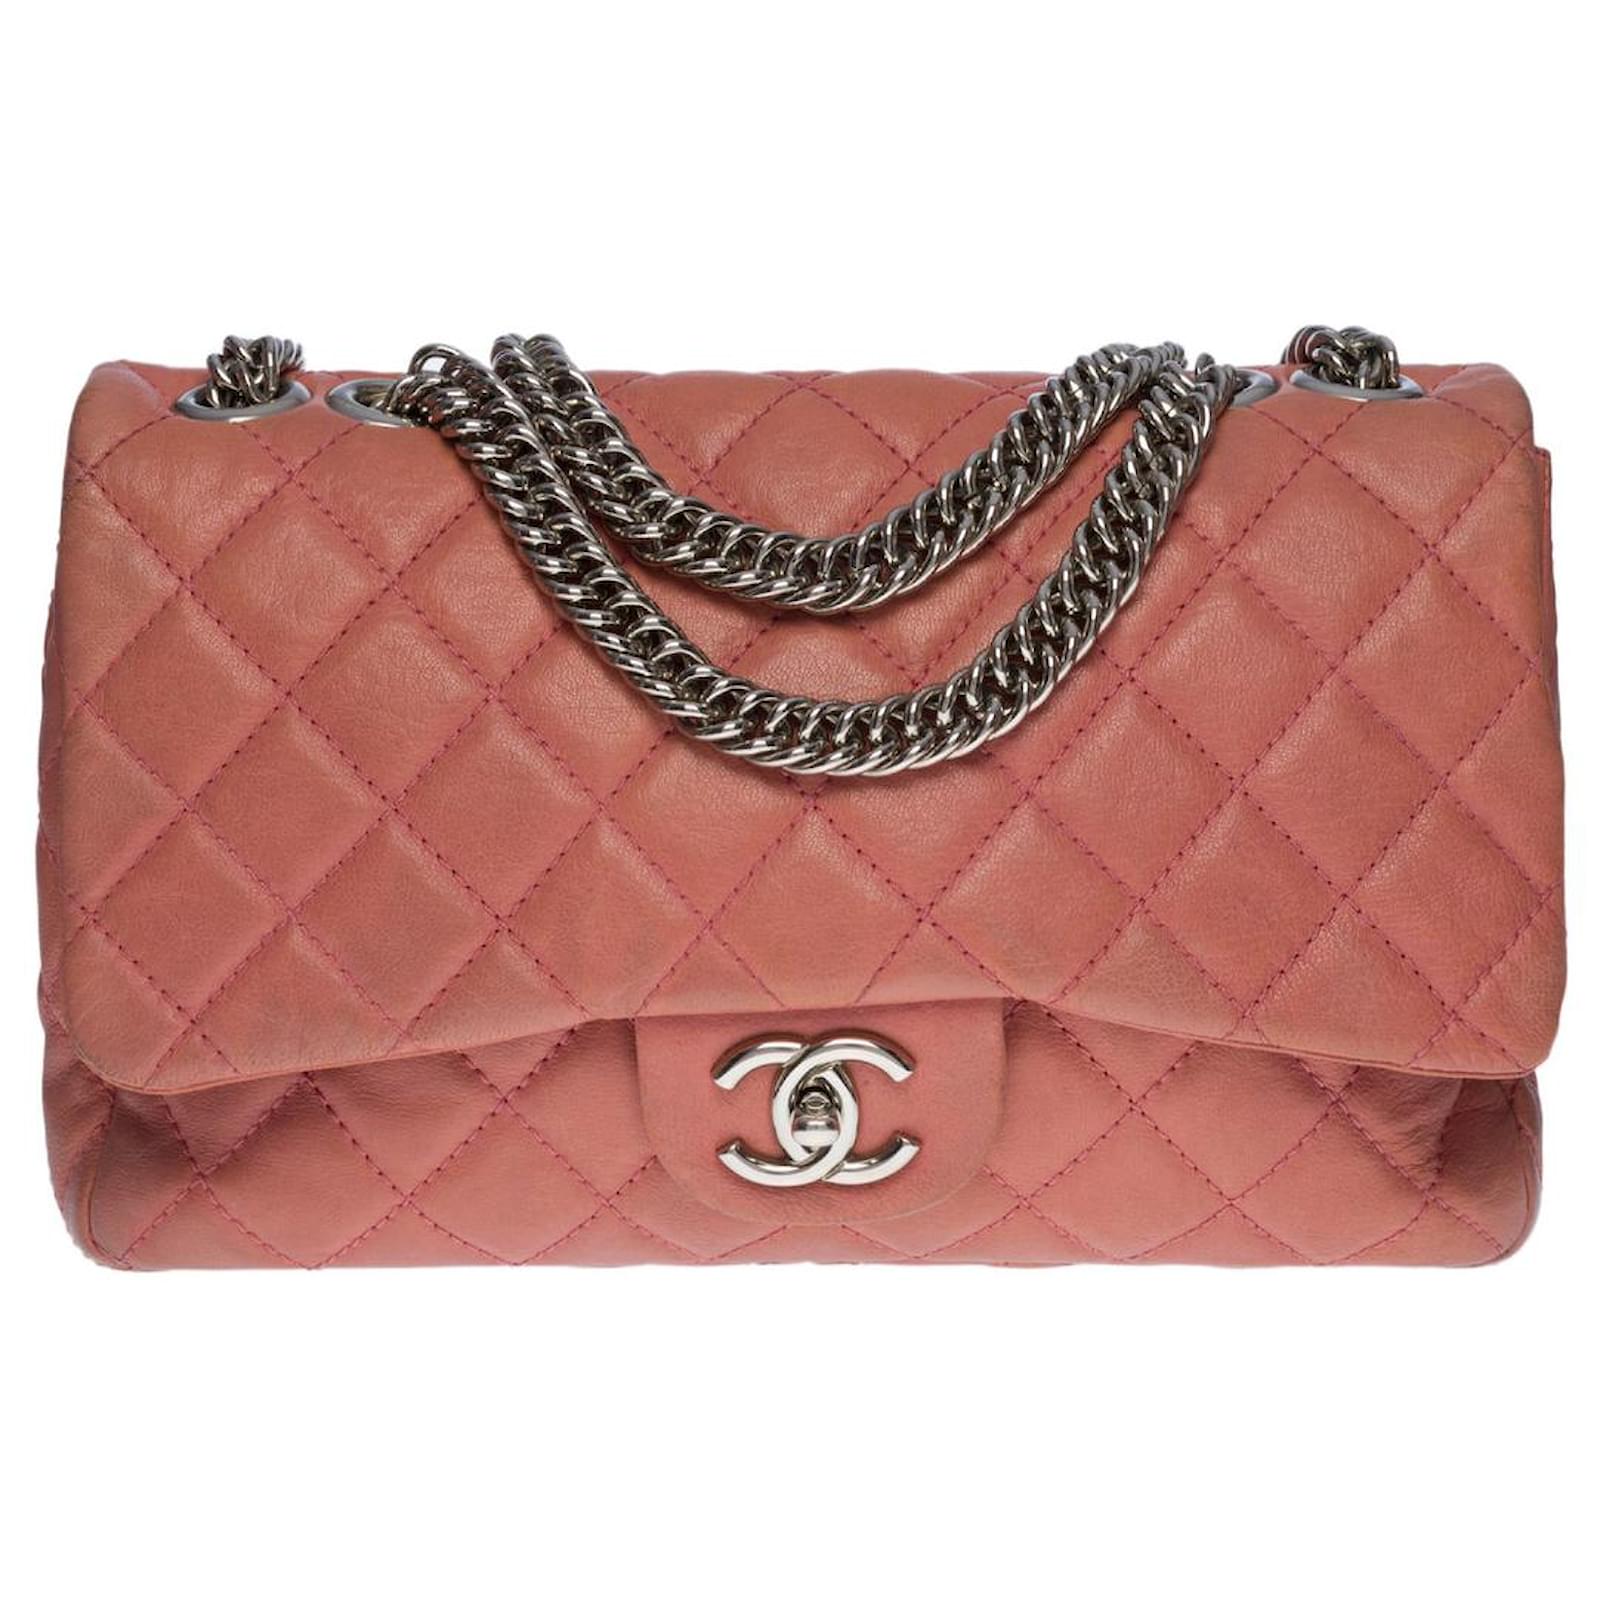 Chanel Vintage Medium Classic Single Flap Bag Quilted Jersey Pink